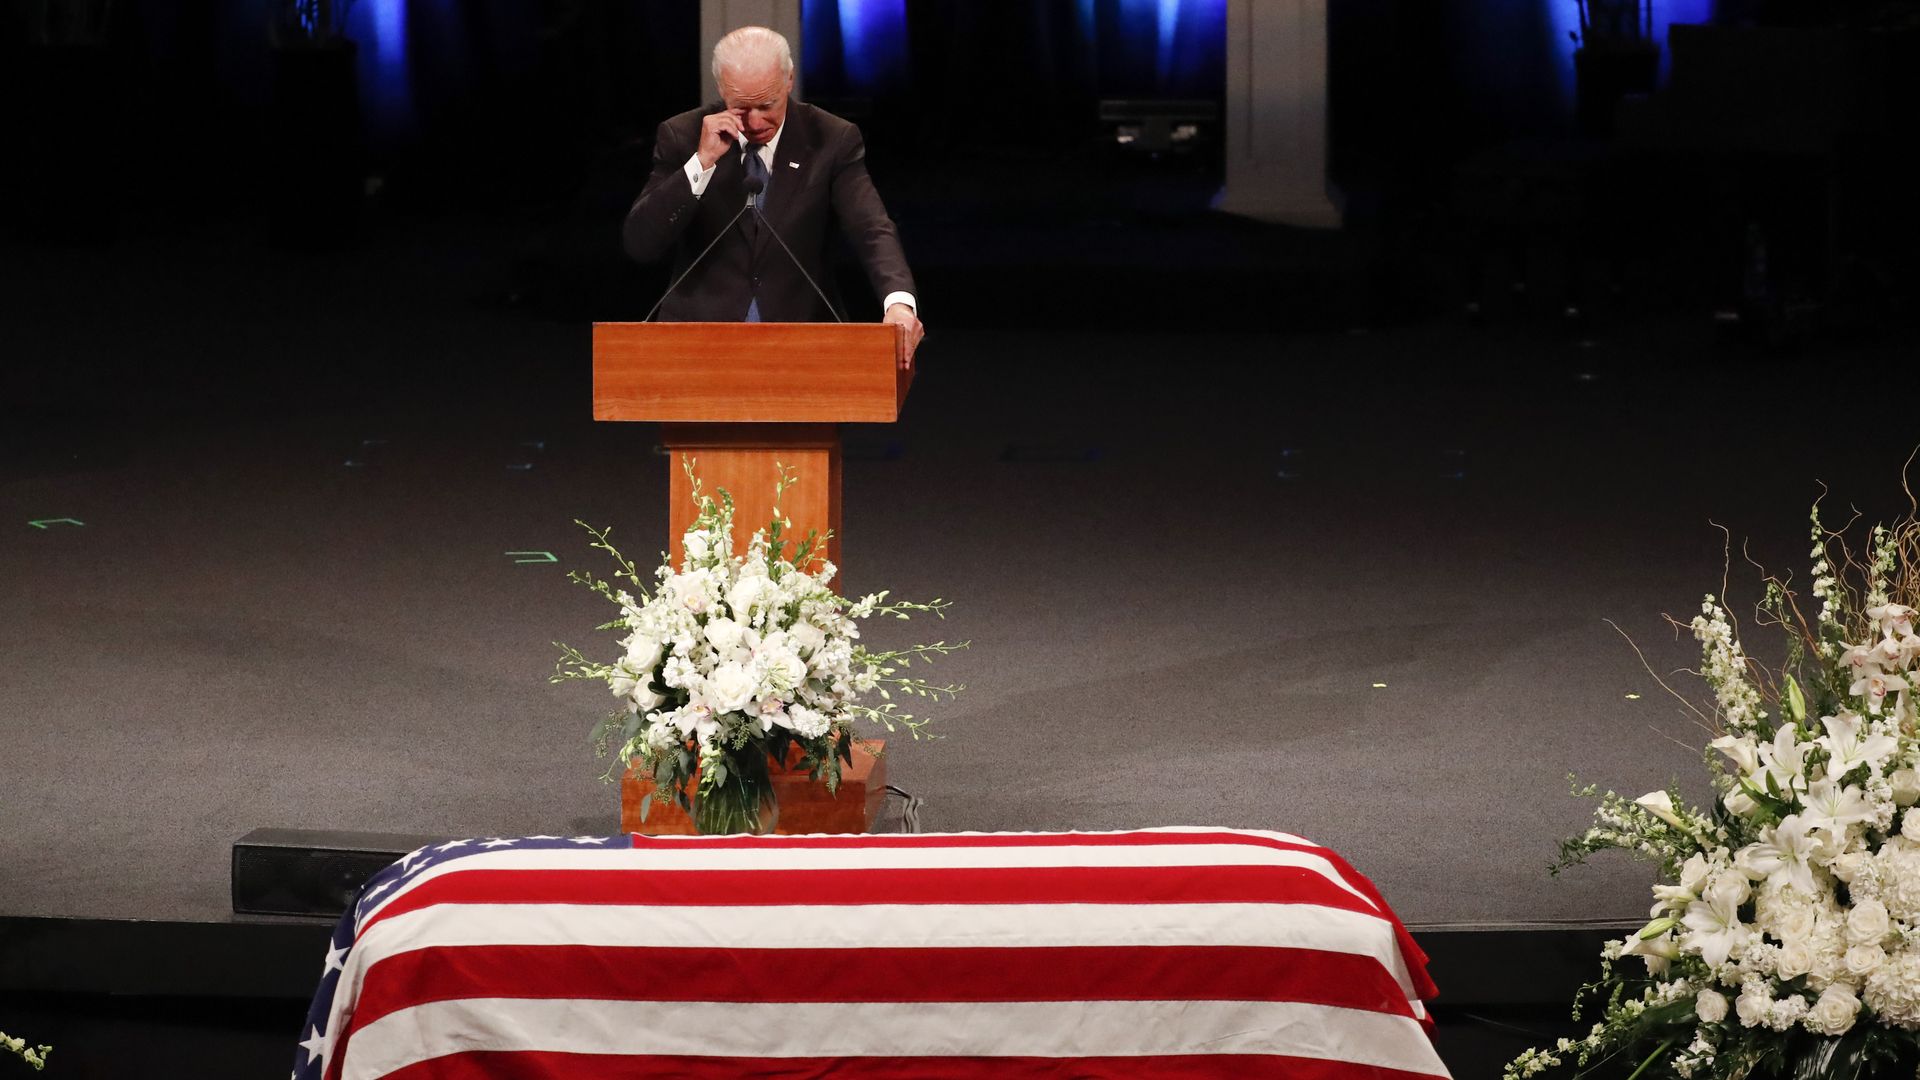 Joe Biden touches his face while crying standing at podium before McCain's casket covered in American flag